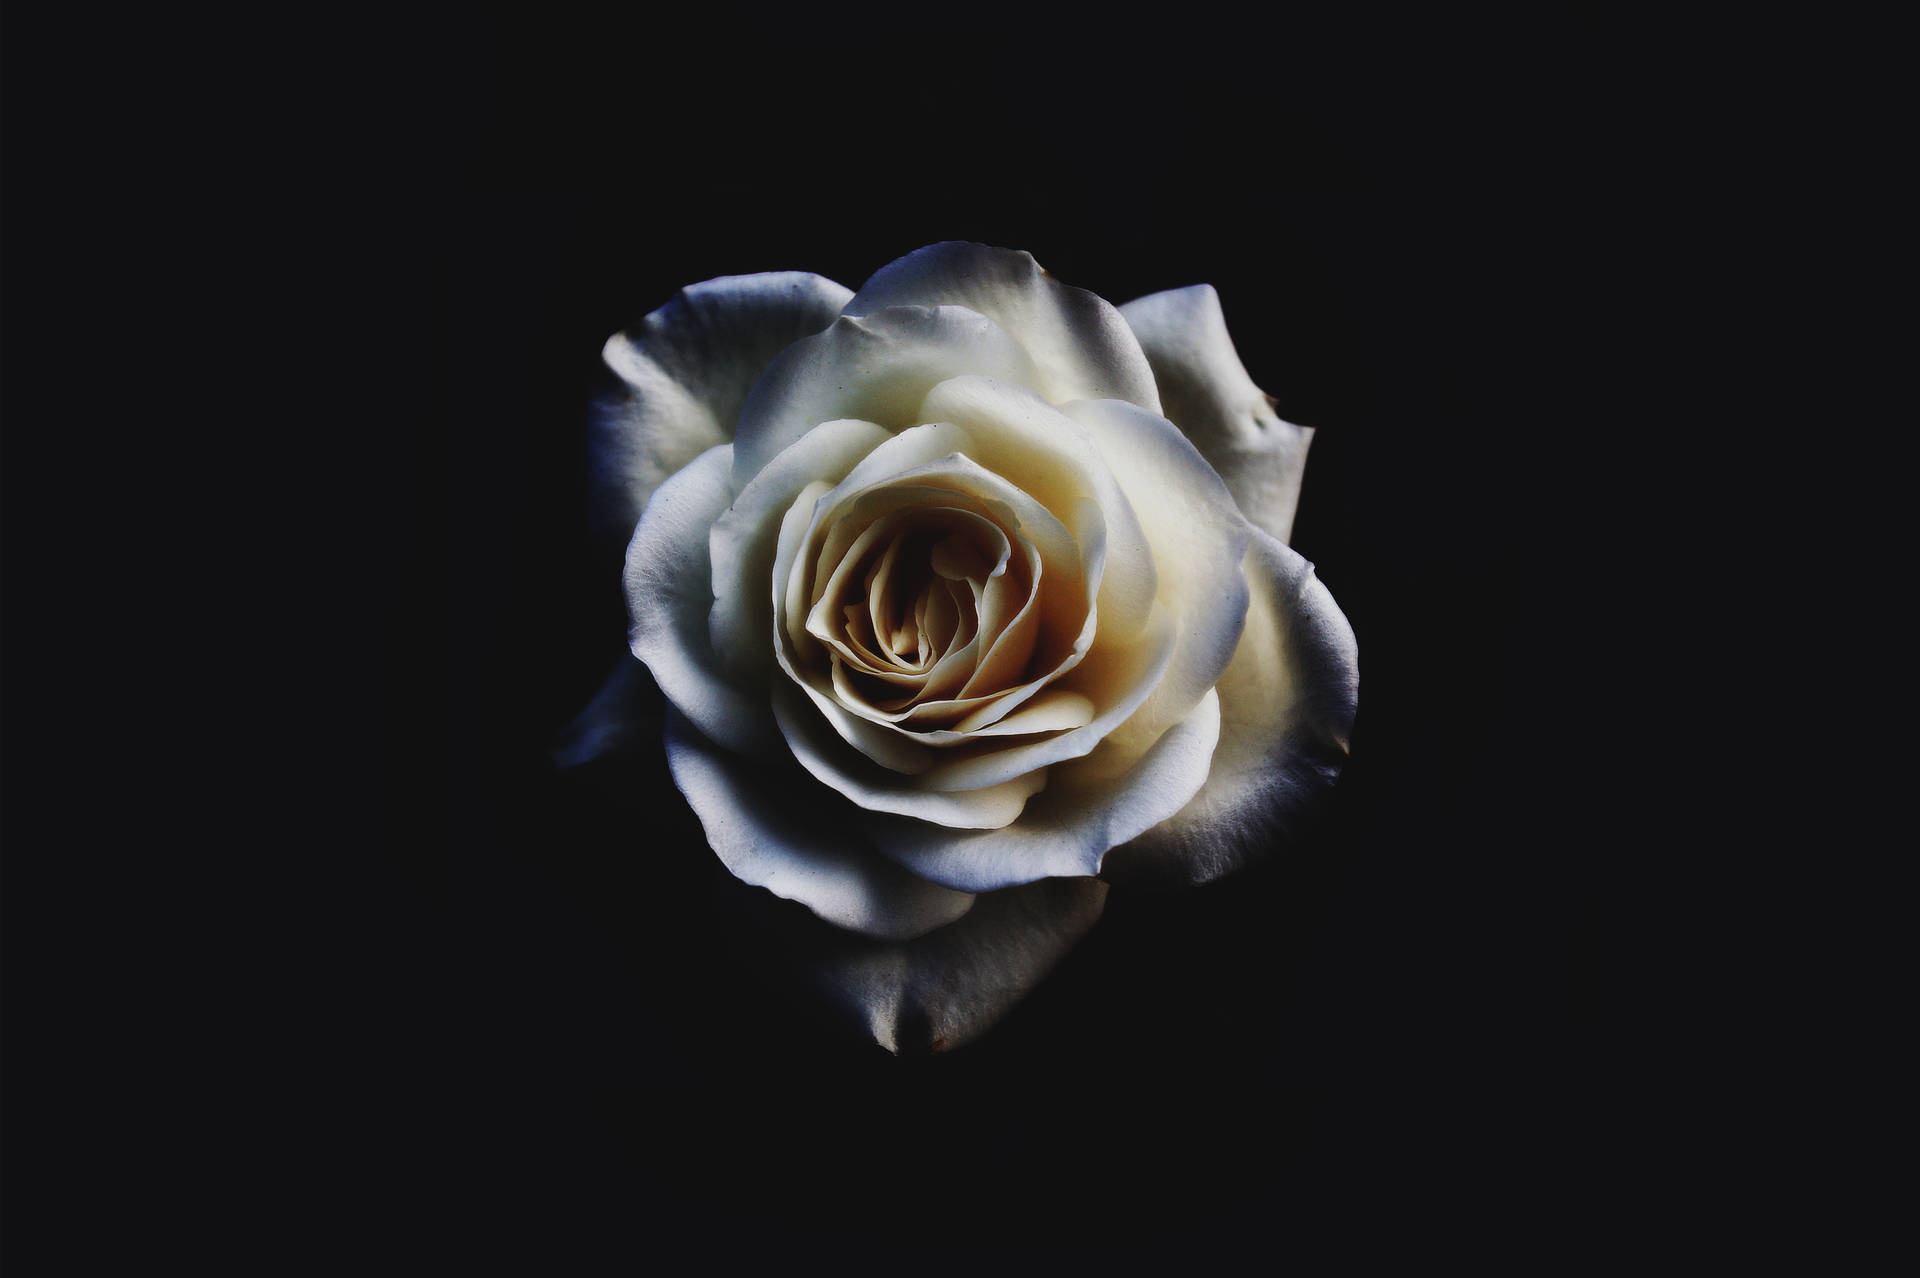 Awesome wallpaper of white blooming rose in a black background. 